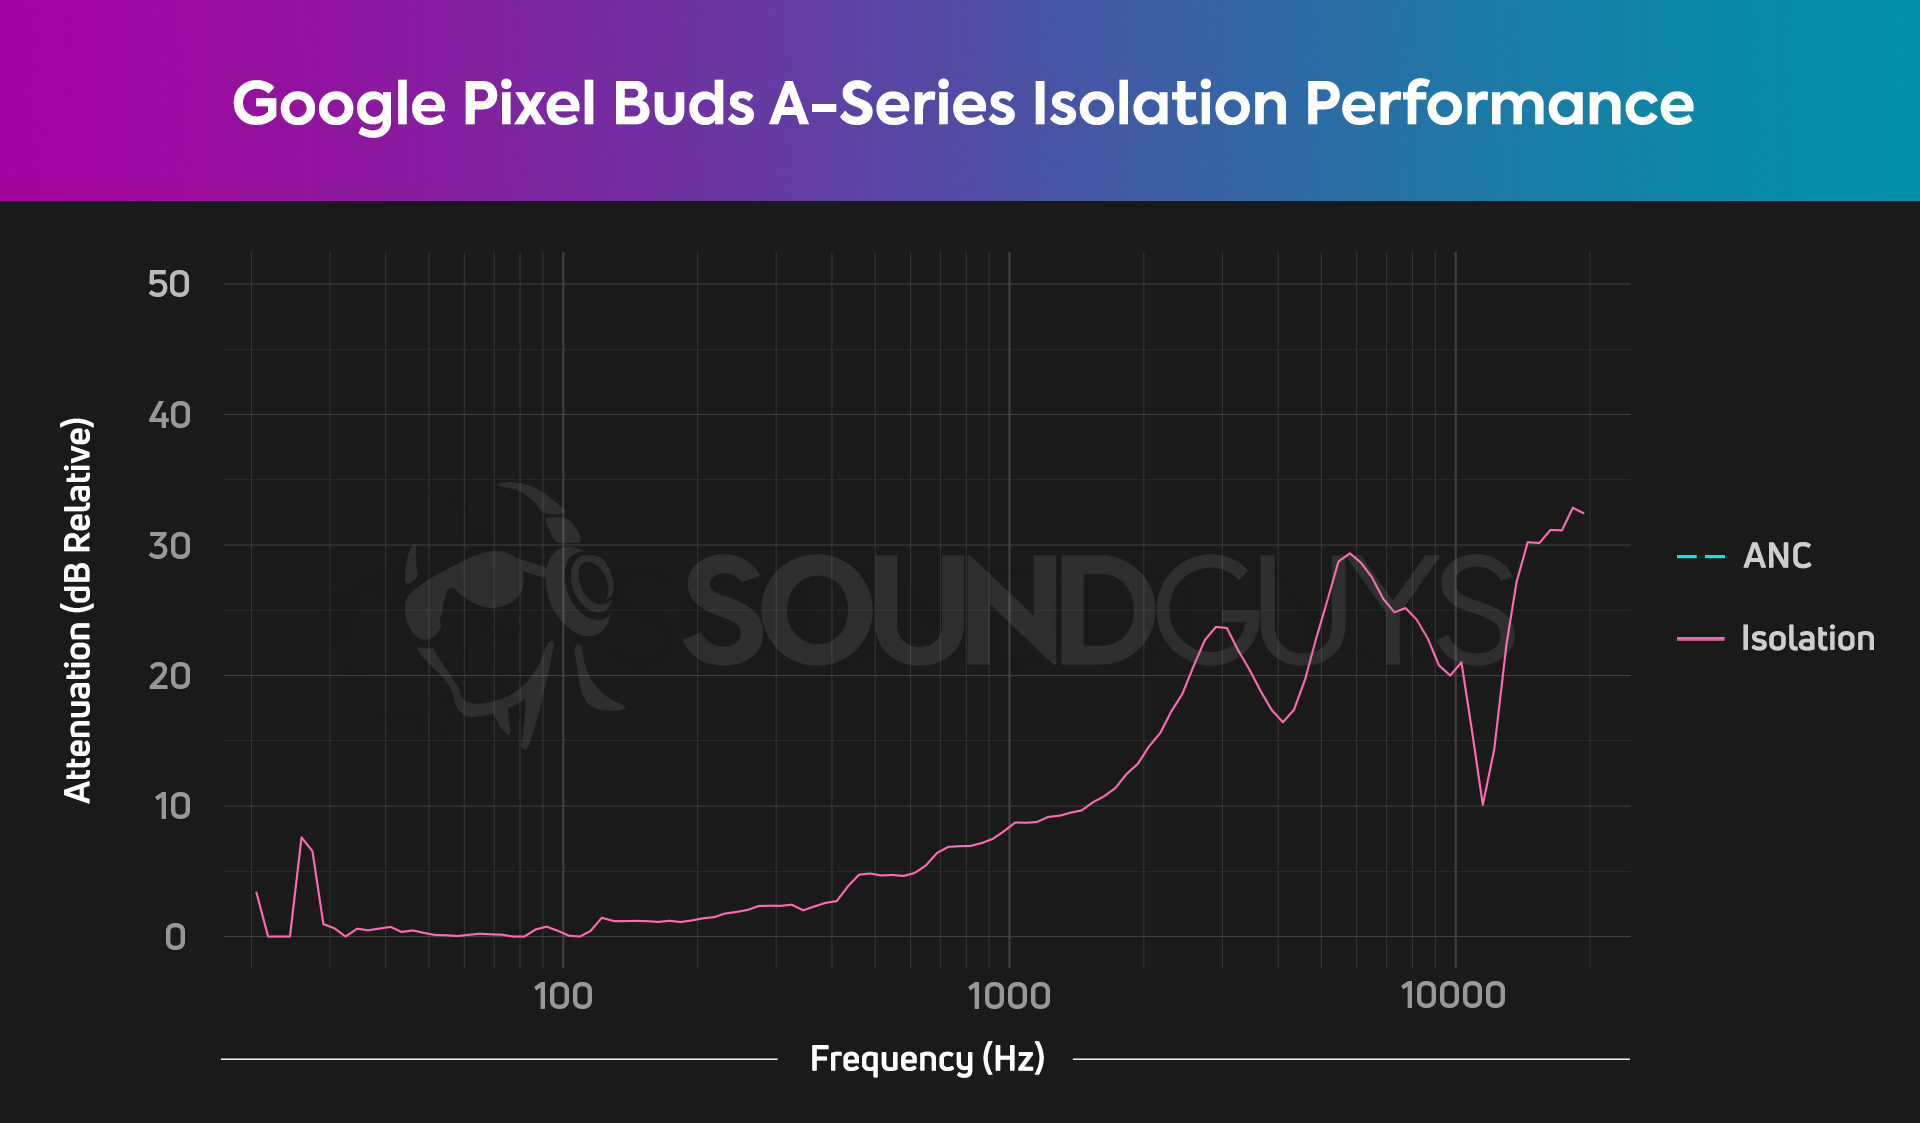 A chart showing the mediocre isolation performance of the Google Pixel Buds A-Series